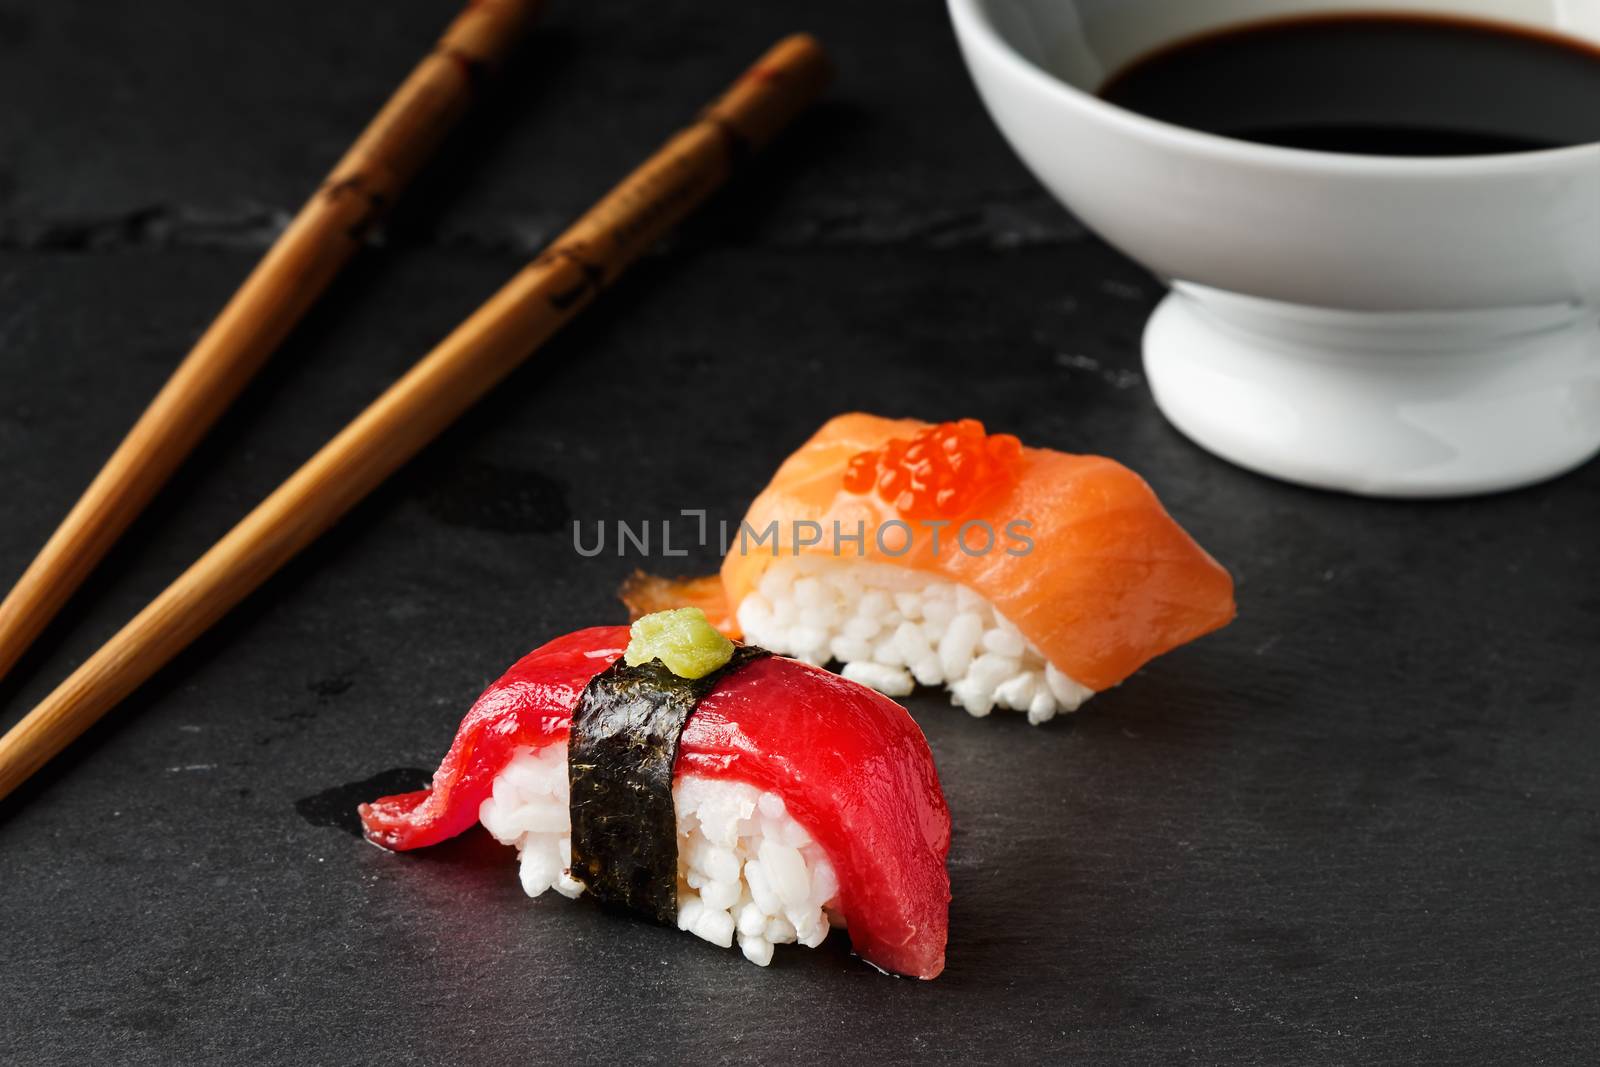  Red tuna Nigiri with Nori seaweed and wasabi paste on black slate stone with chopsticks and bowl of soy sauce. Raw fish in traditional Japanese sushi style. Horizontal image.